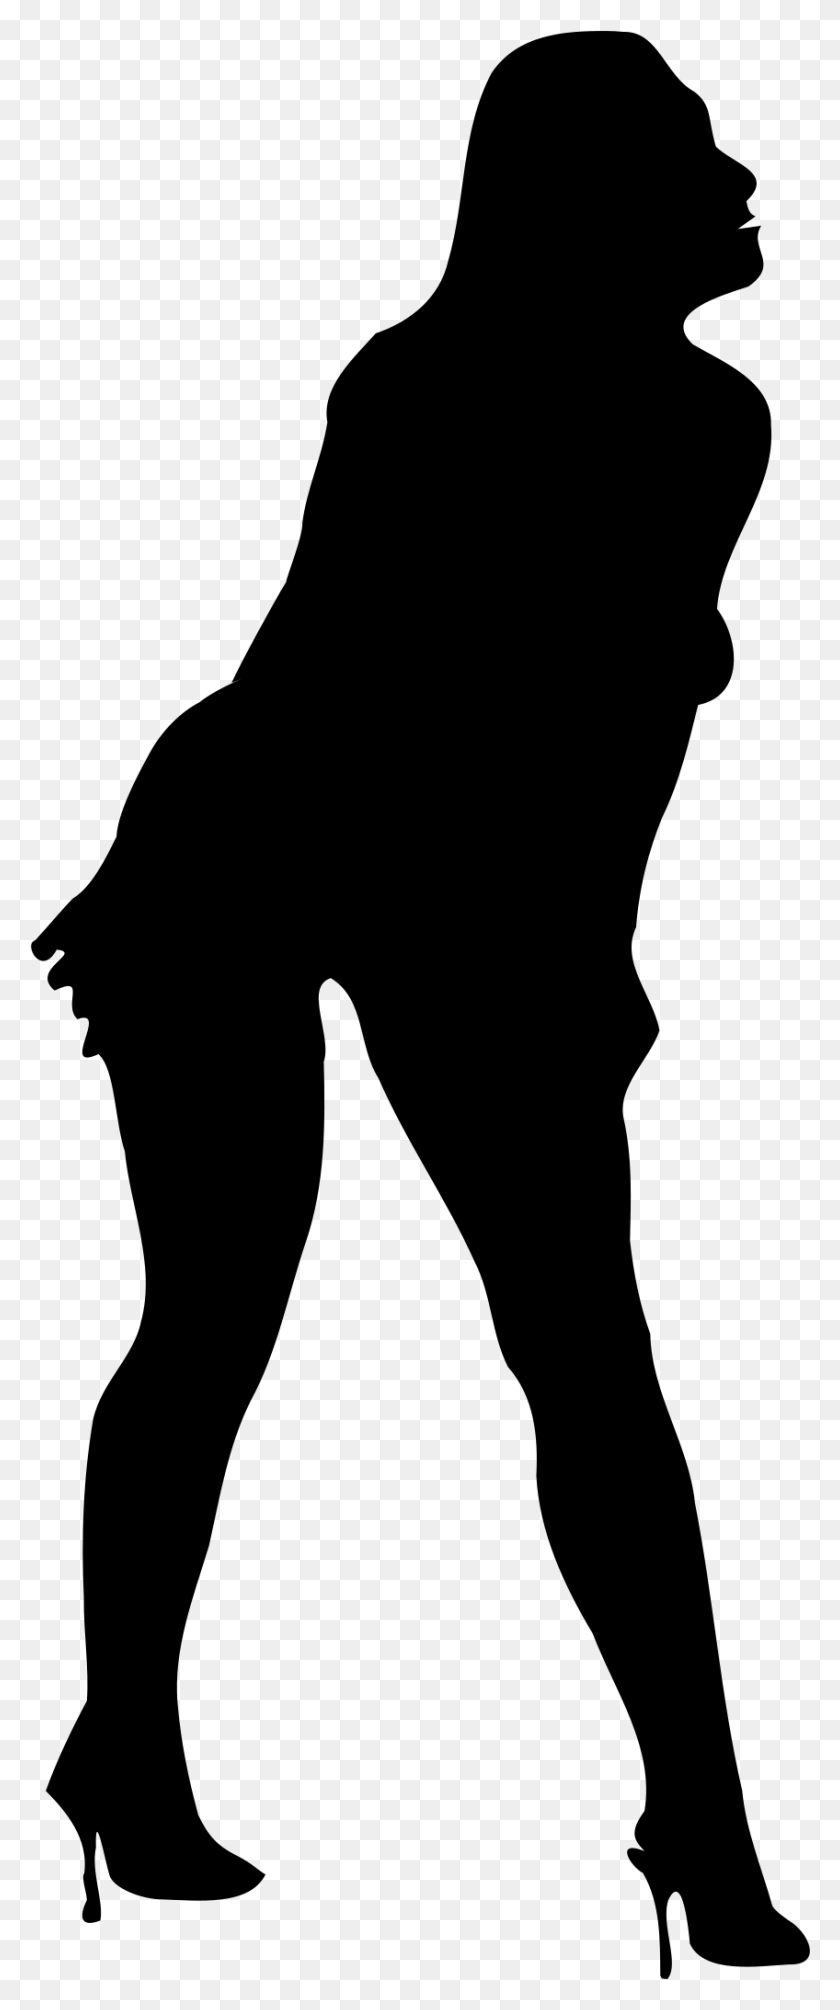 848x2121 This Free Icons Design Of Woman Silhouette 56 Contorno De Mulher, Gray, World Of Warcraft Hd Png